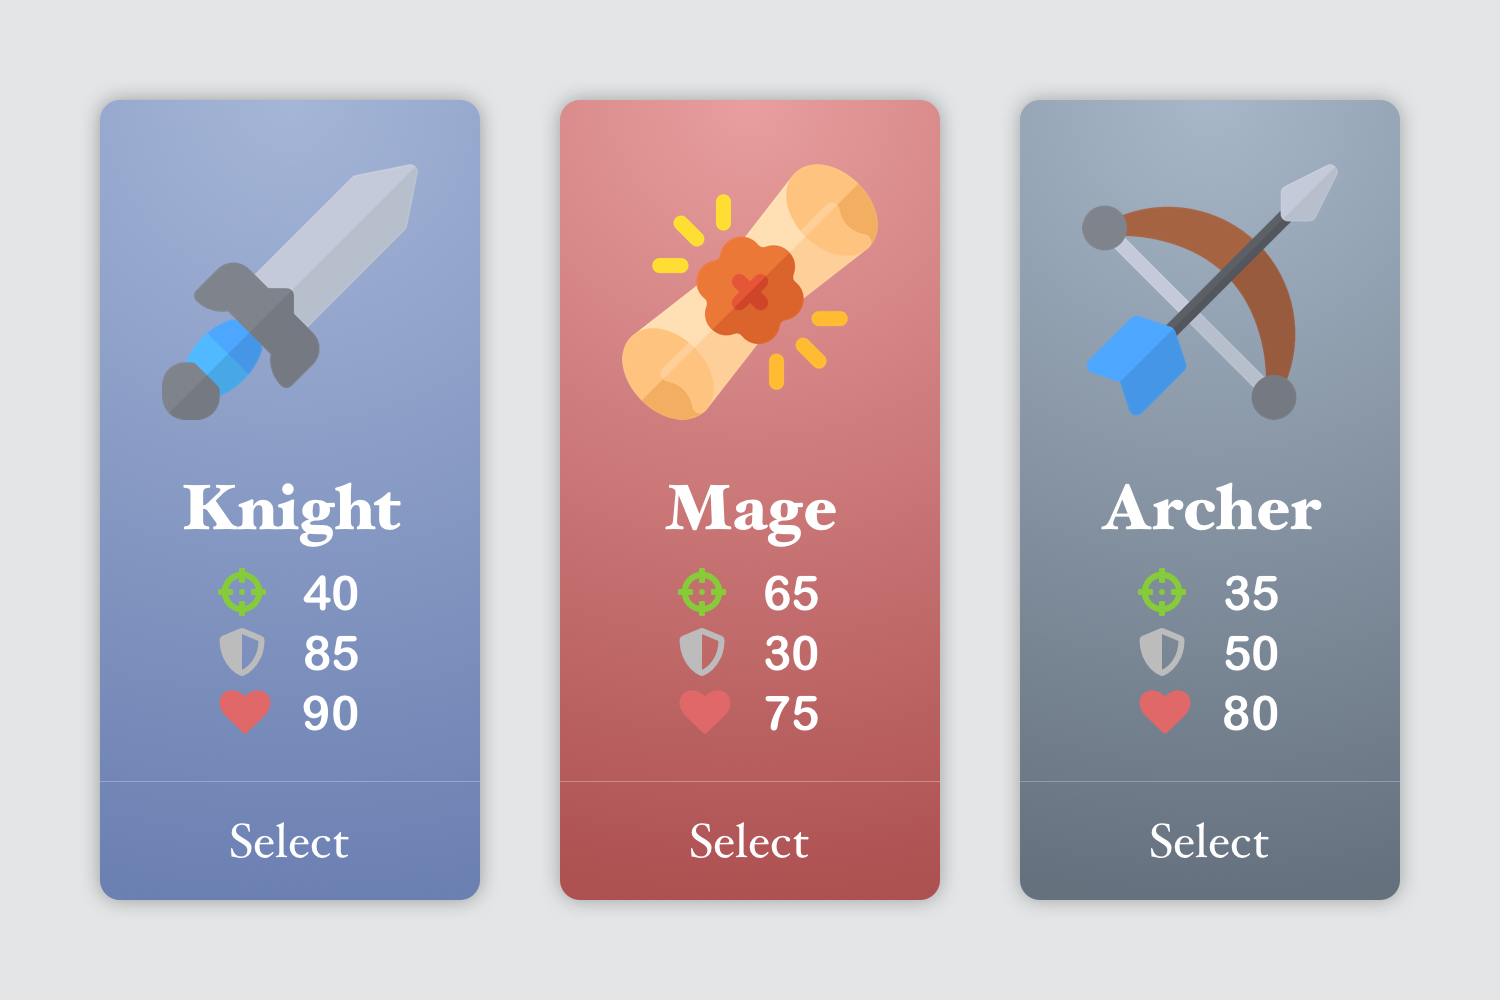 Day 64 - Select User Type